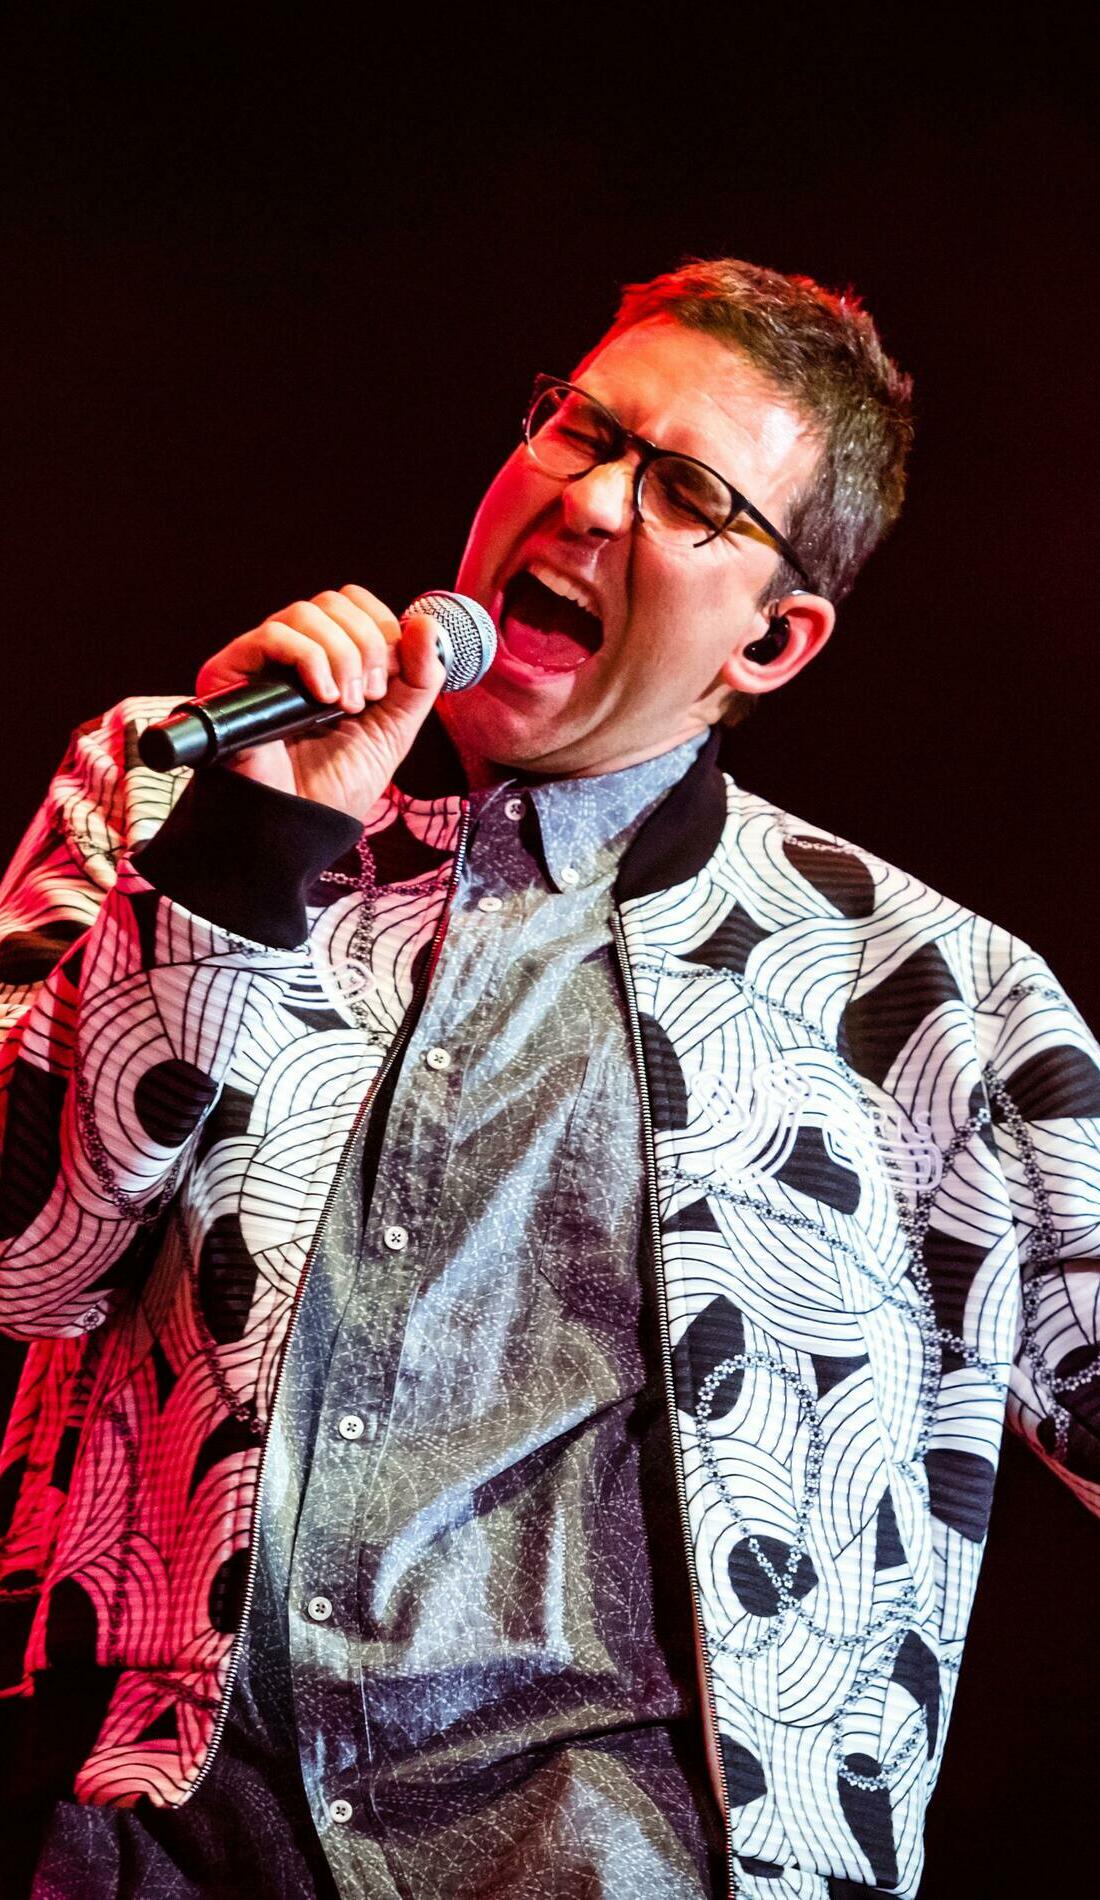 A Jamie Lidell live event